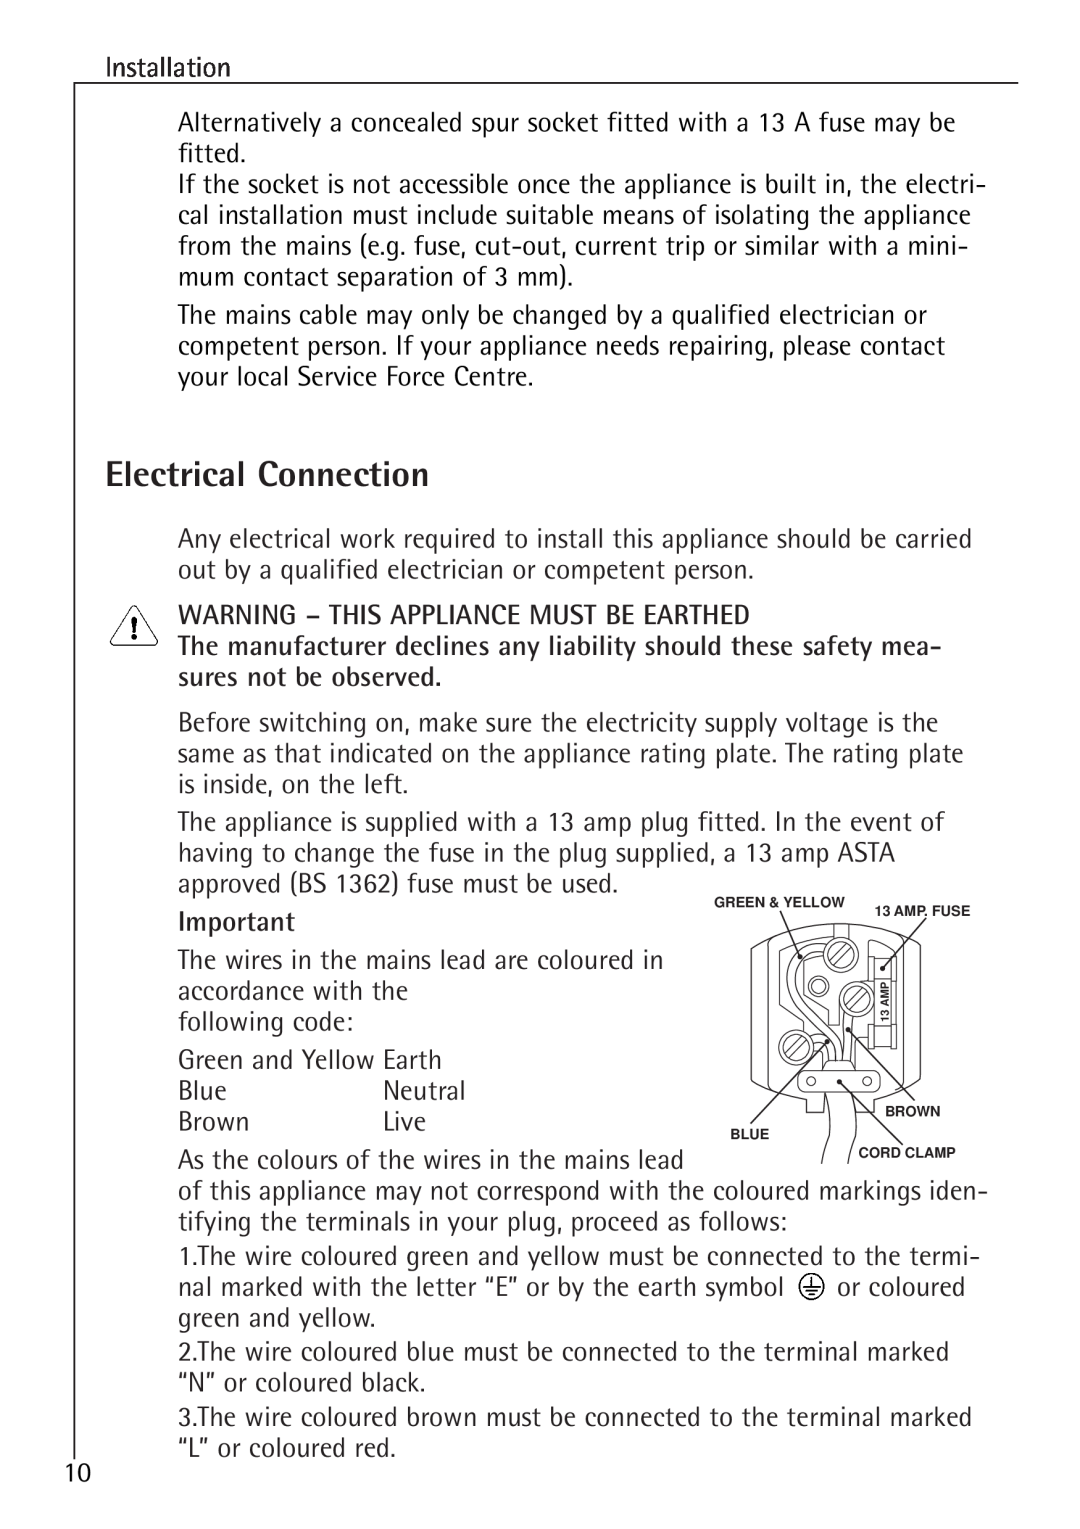 Electrolux 1583-8 TK operating instructions Electrical Connection, Warning - This Appliance Must Be Earthed 